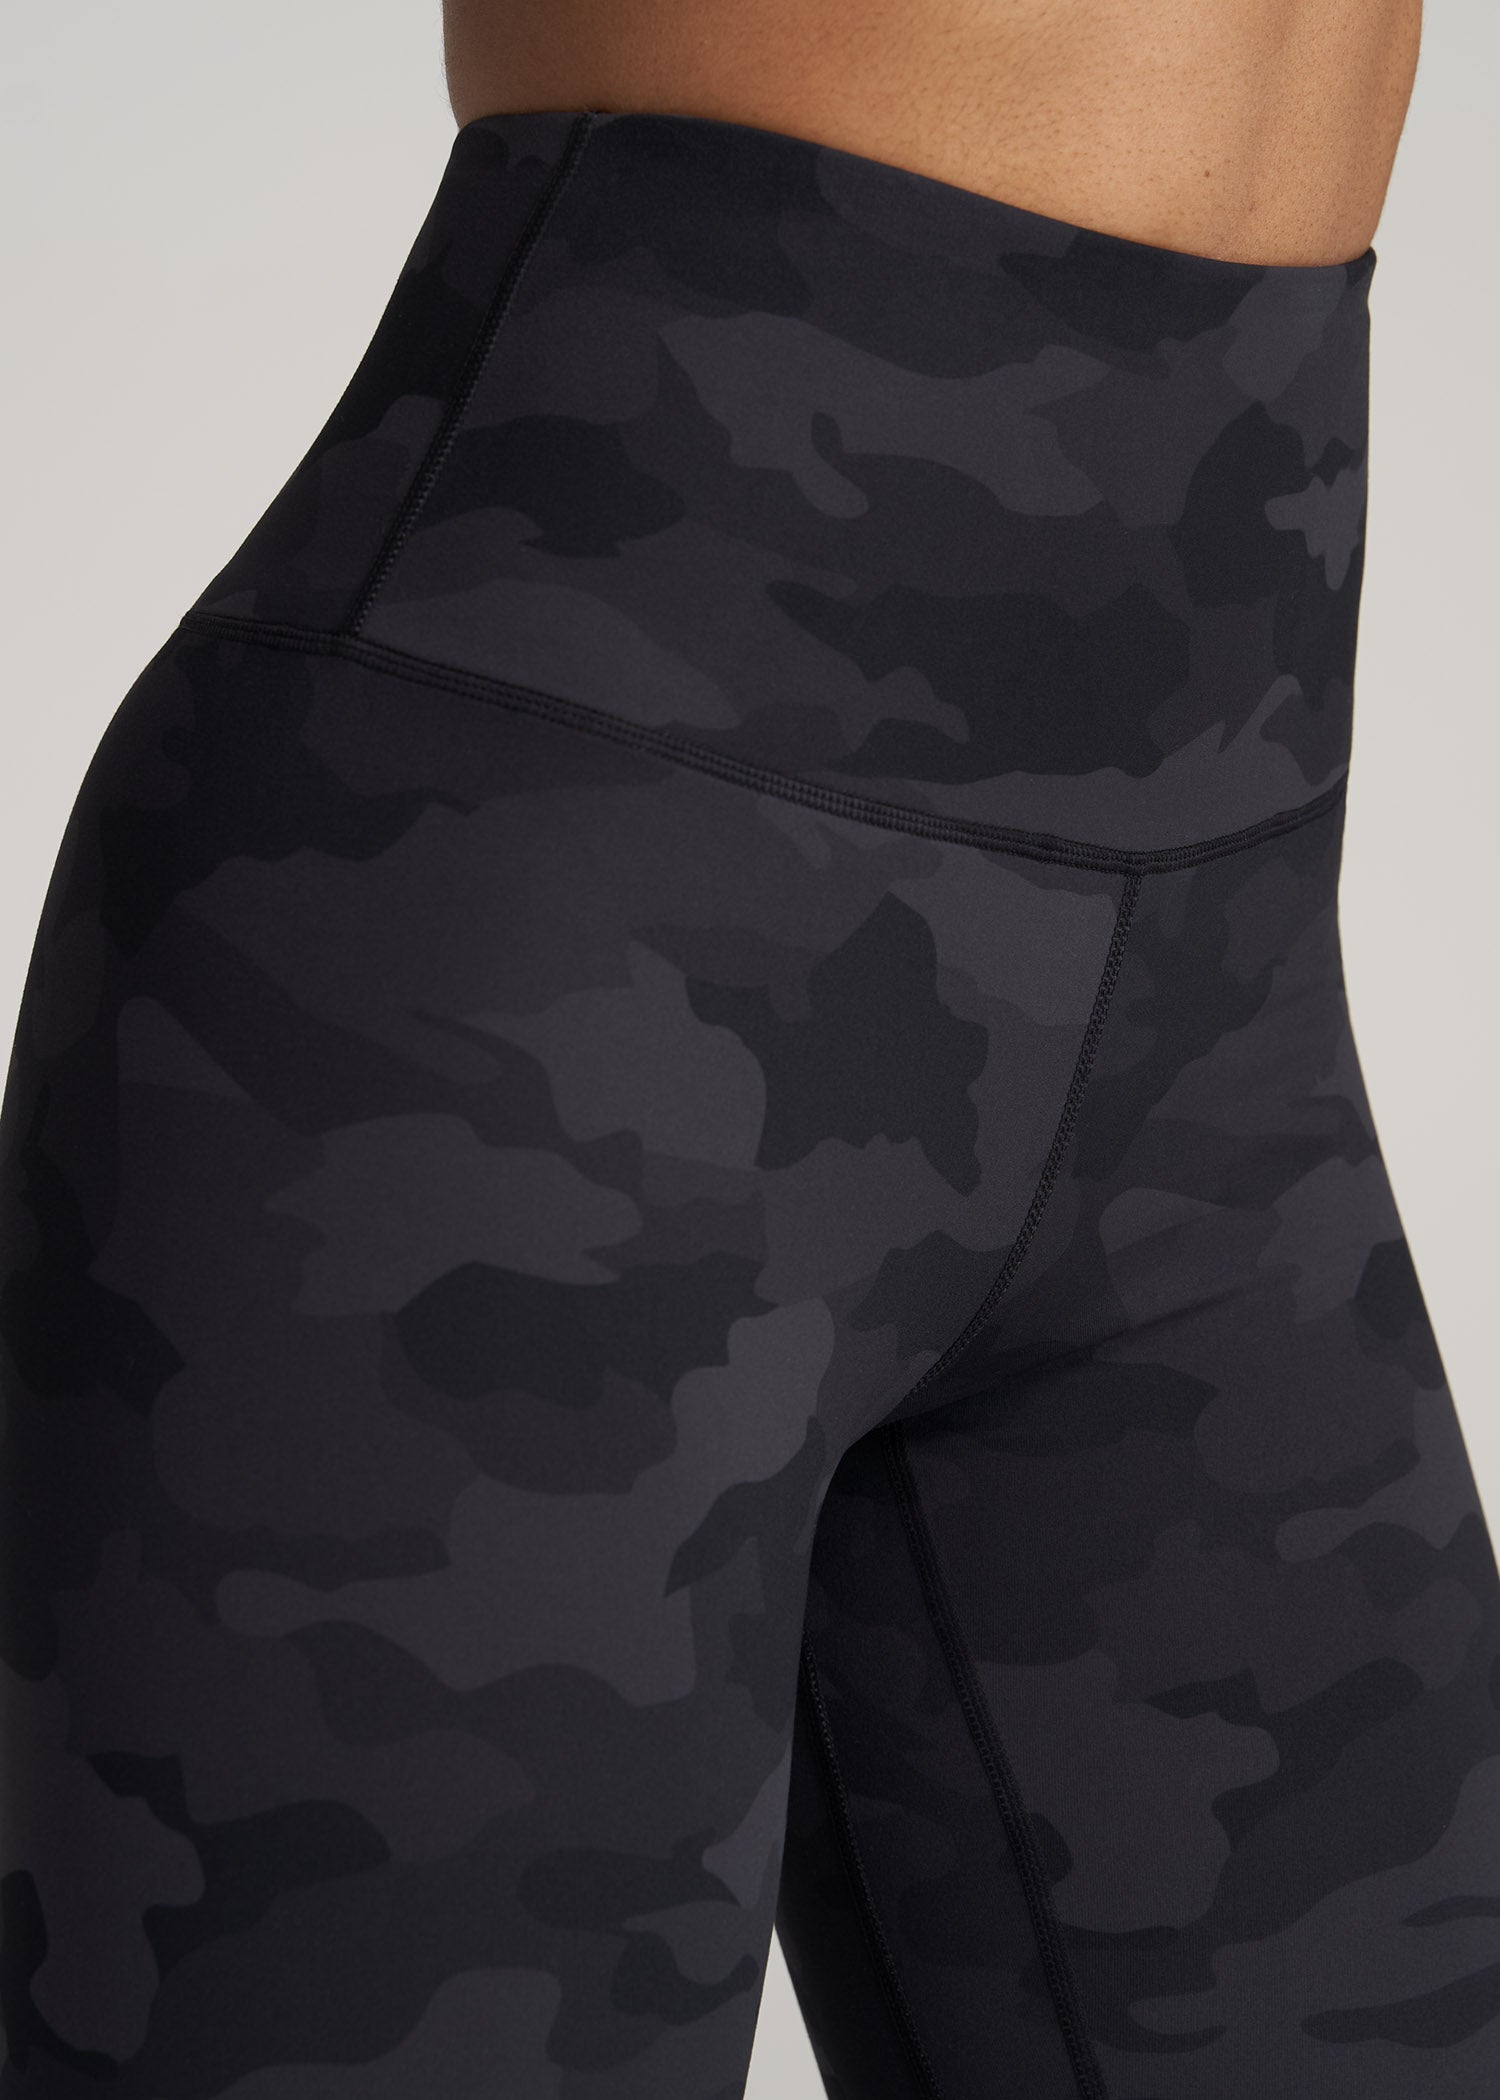 Balance Collection Camouflage Athletic Leggings for Women